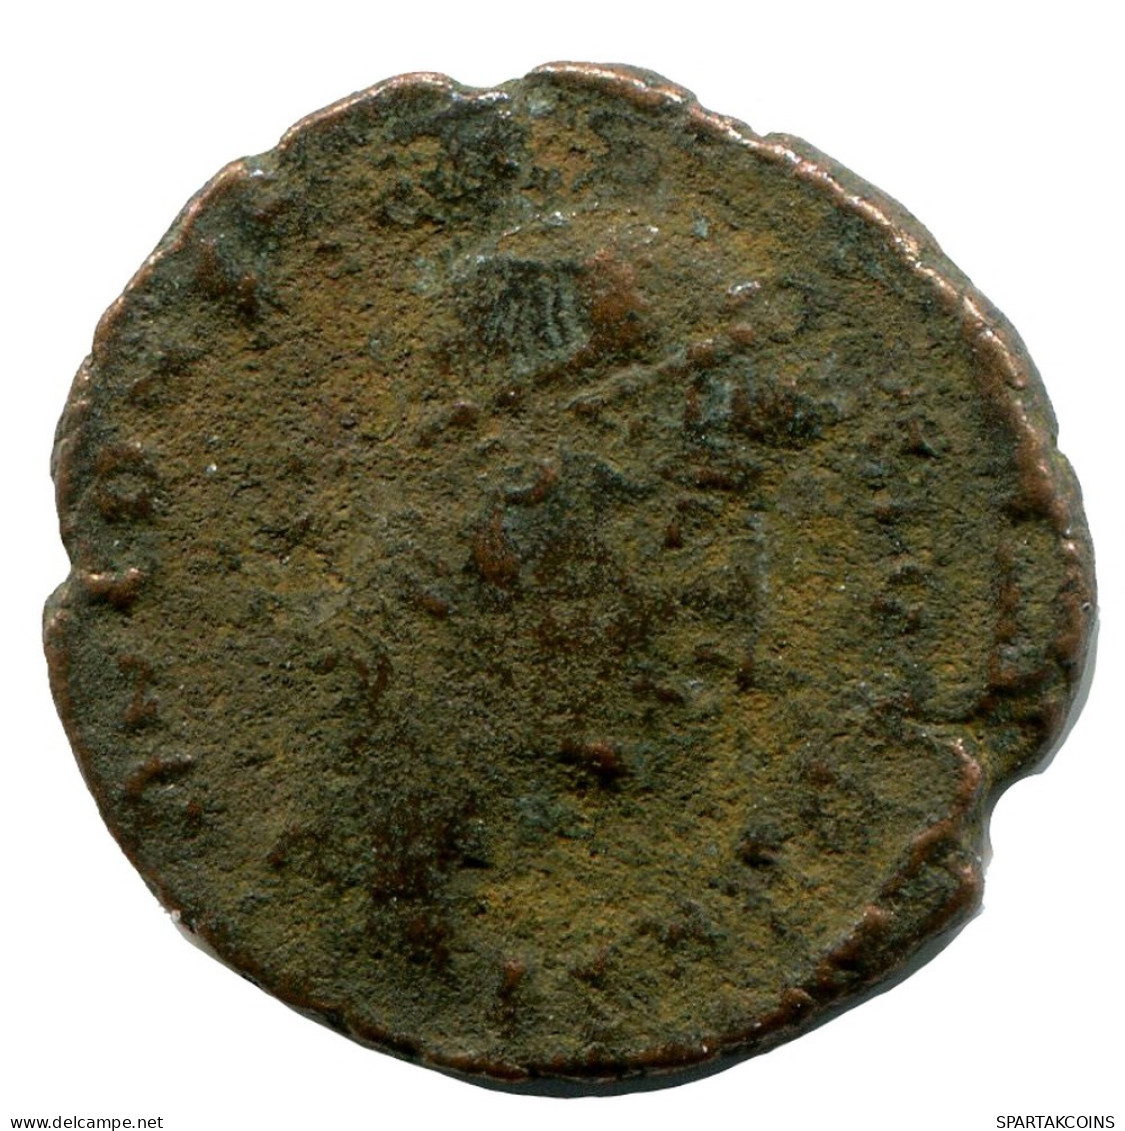 CONSTANTIUS II MINTED IN ALEKSANDRIA FOUND IN IHNASYAH HOARD #ANC10276.14.D.A - The Christian Empire (307 AD Tot 363 AD)